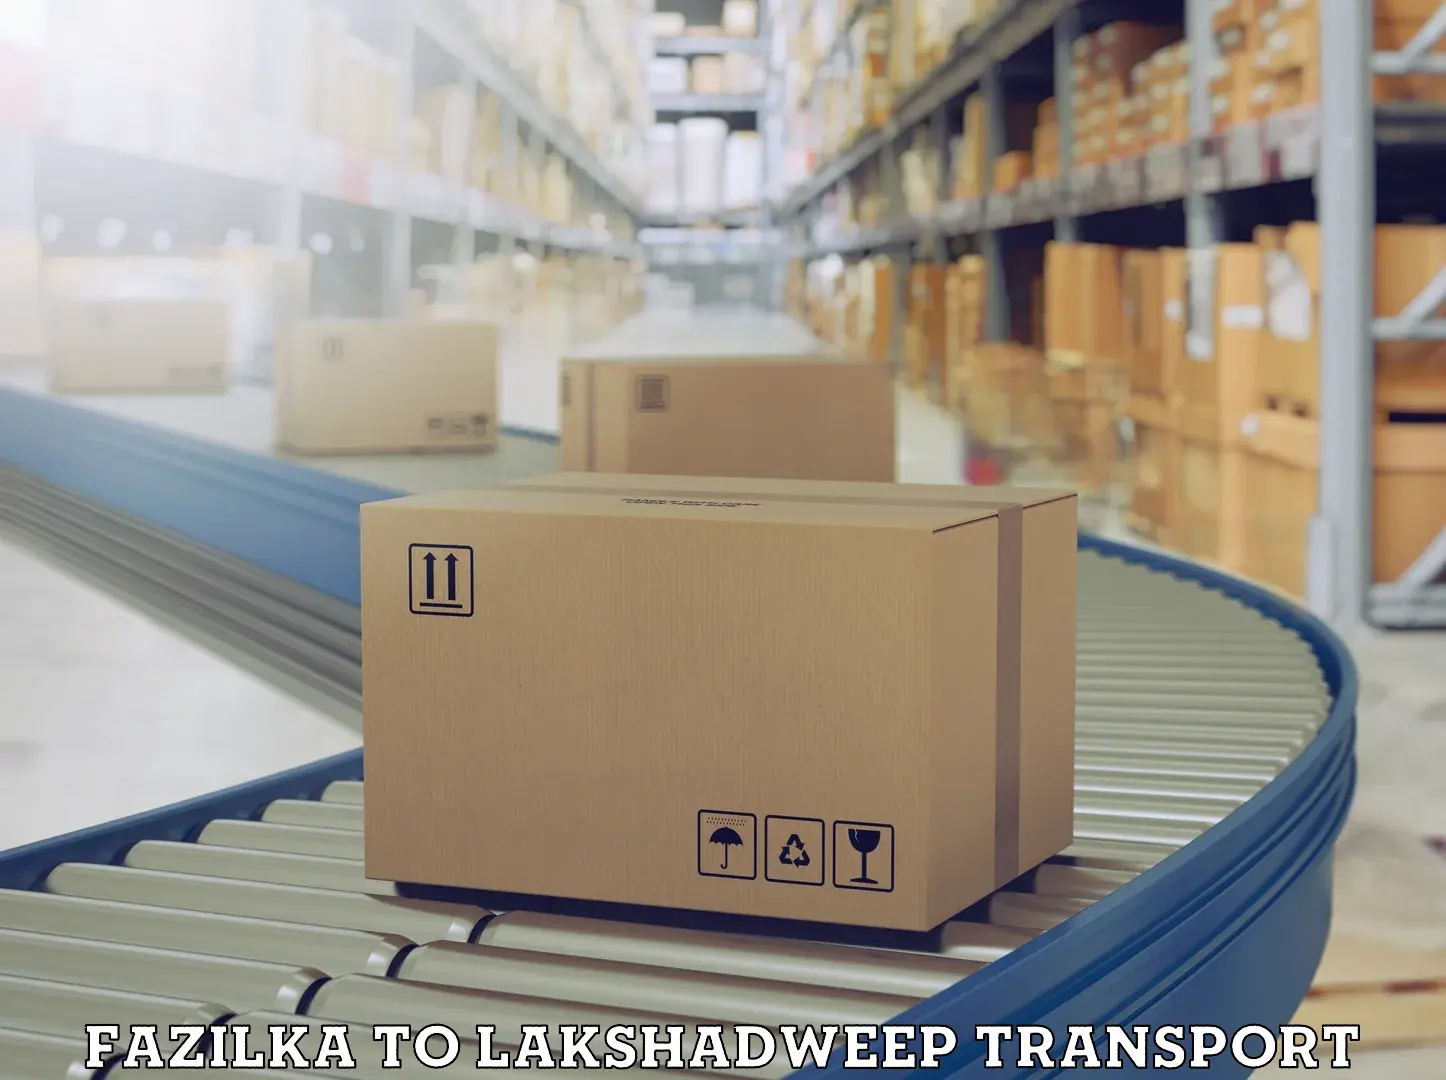 Commercial transport service Fazilka to Lakshadweep